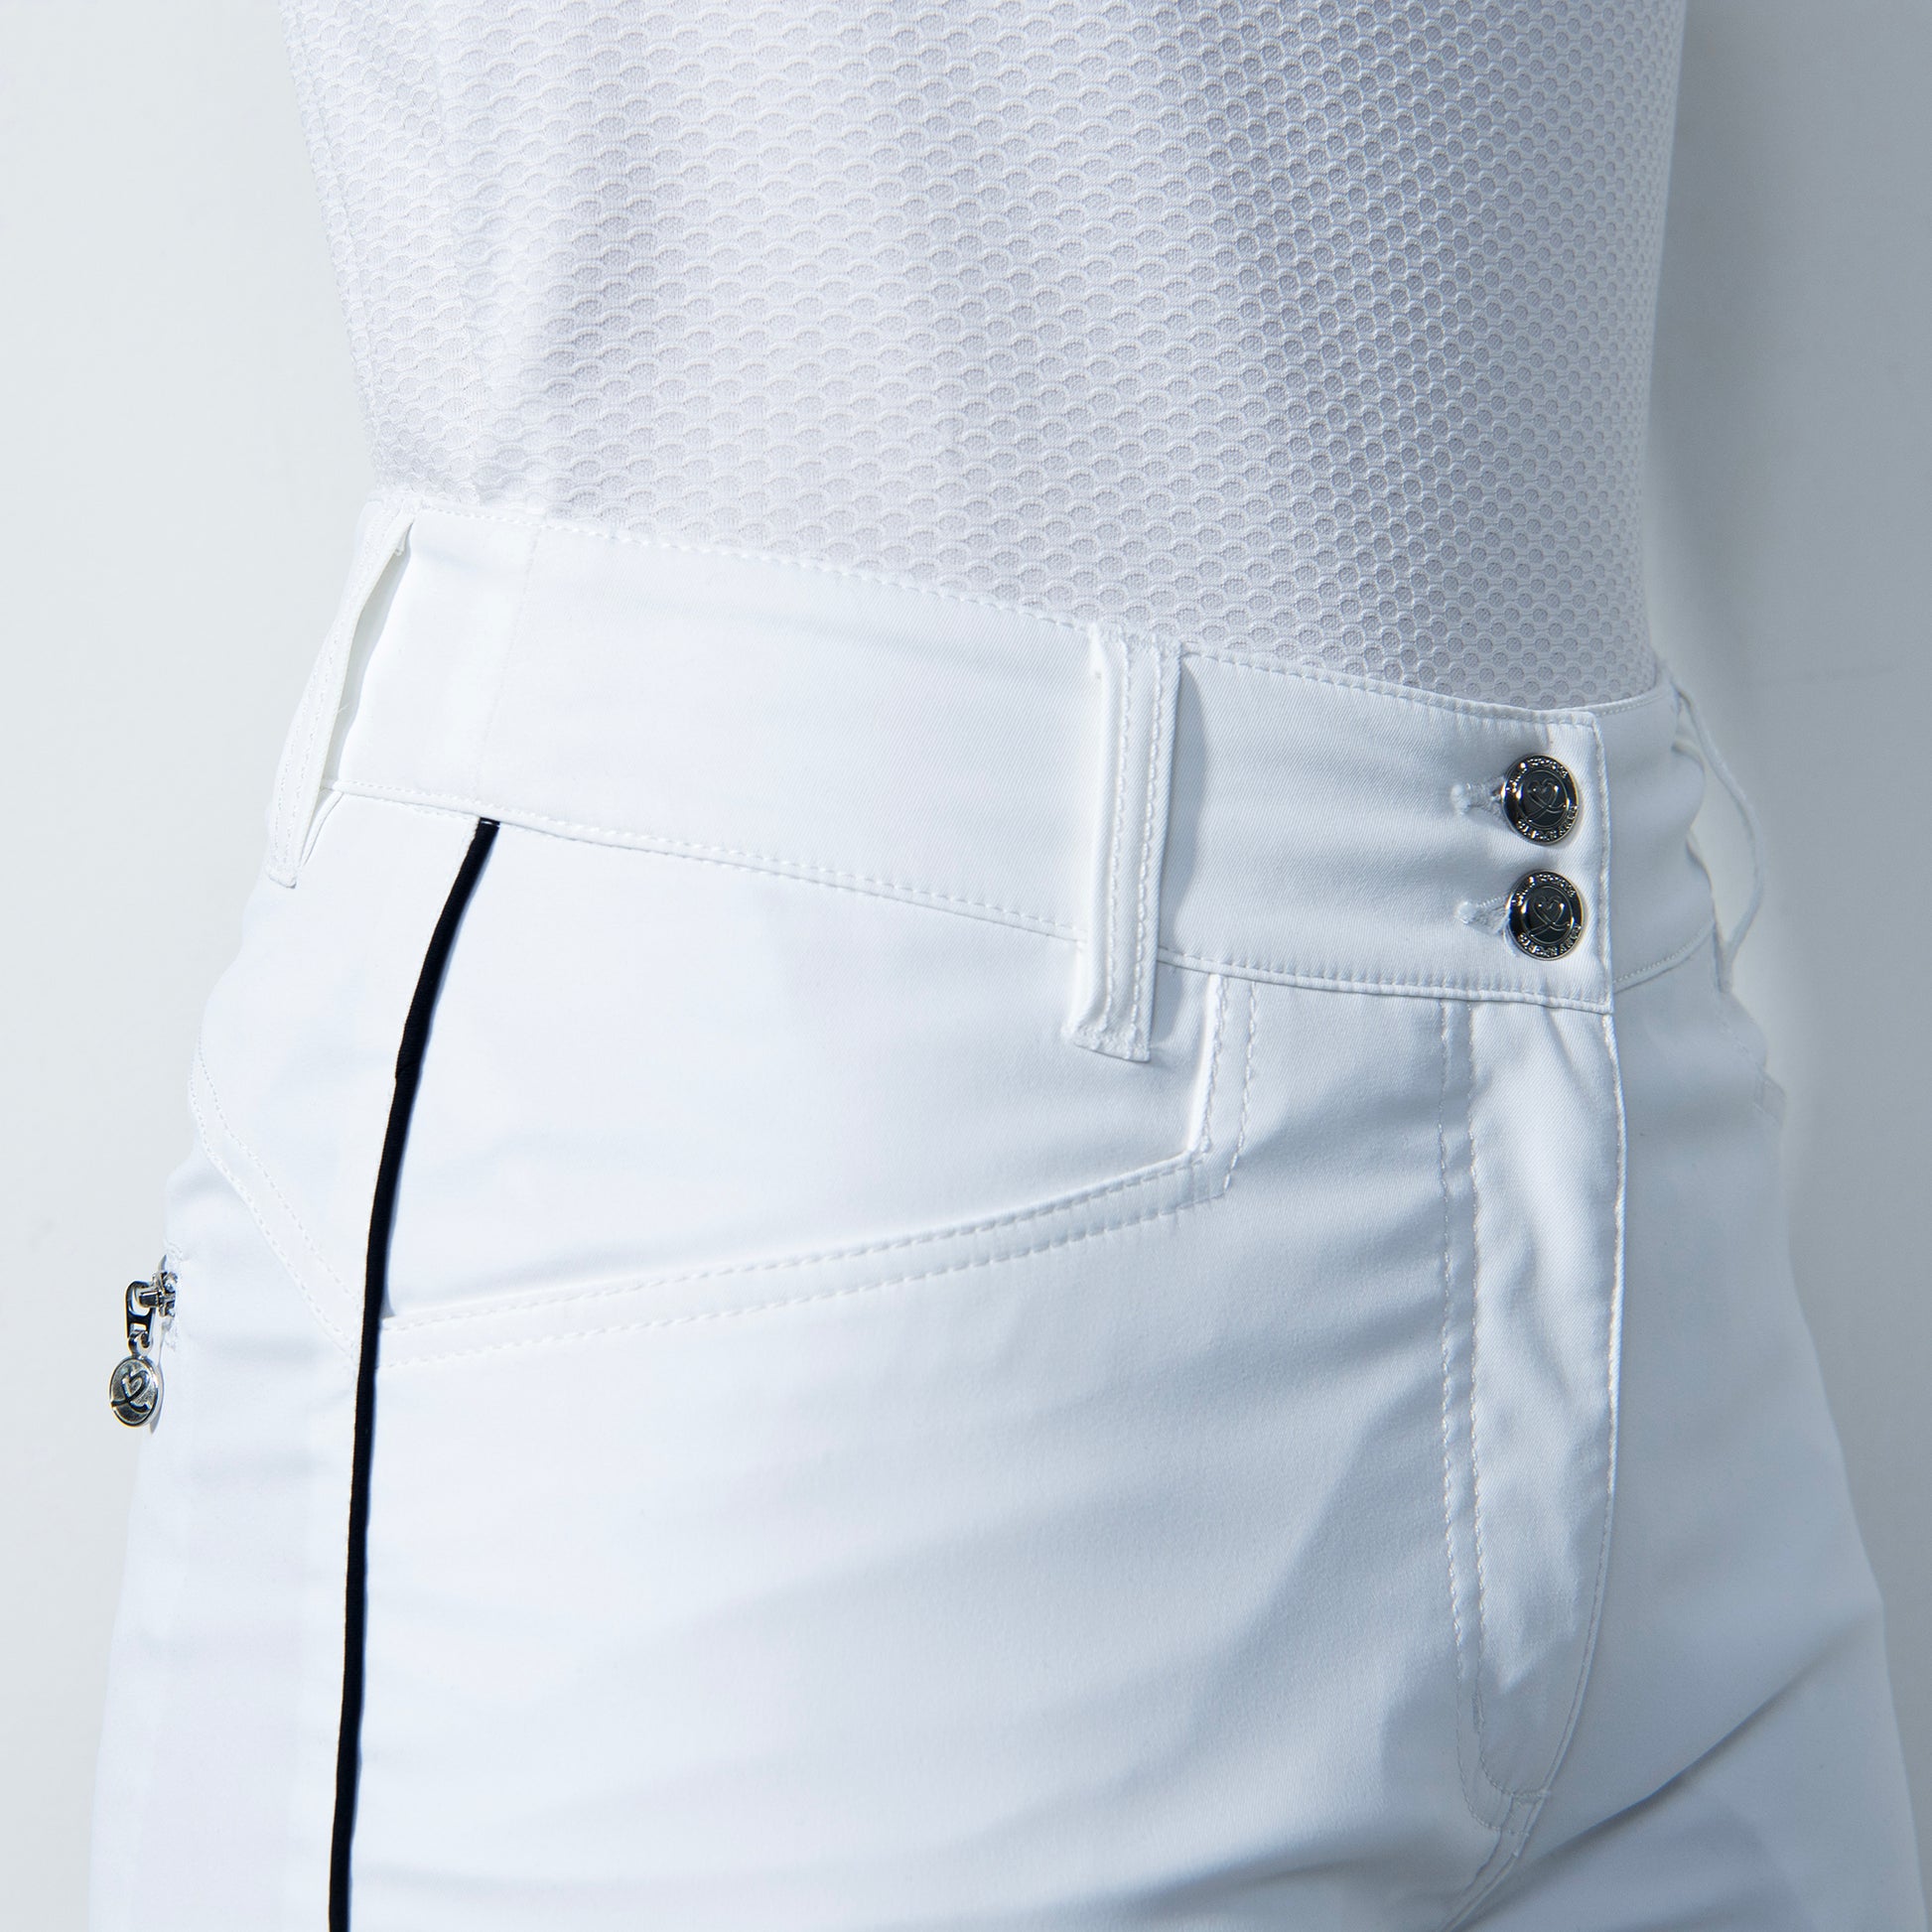 Daily Sports Ladies Glam Ankle Trouser in White